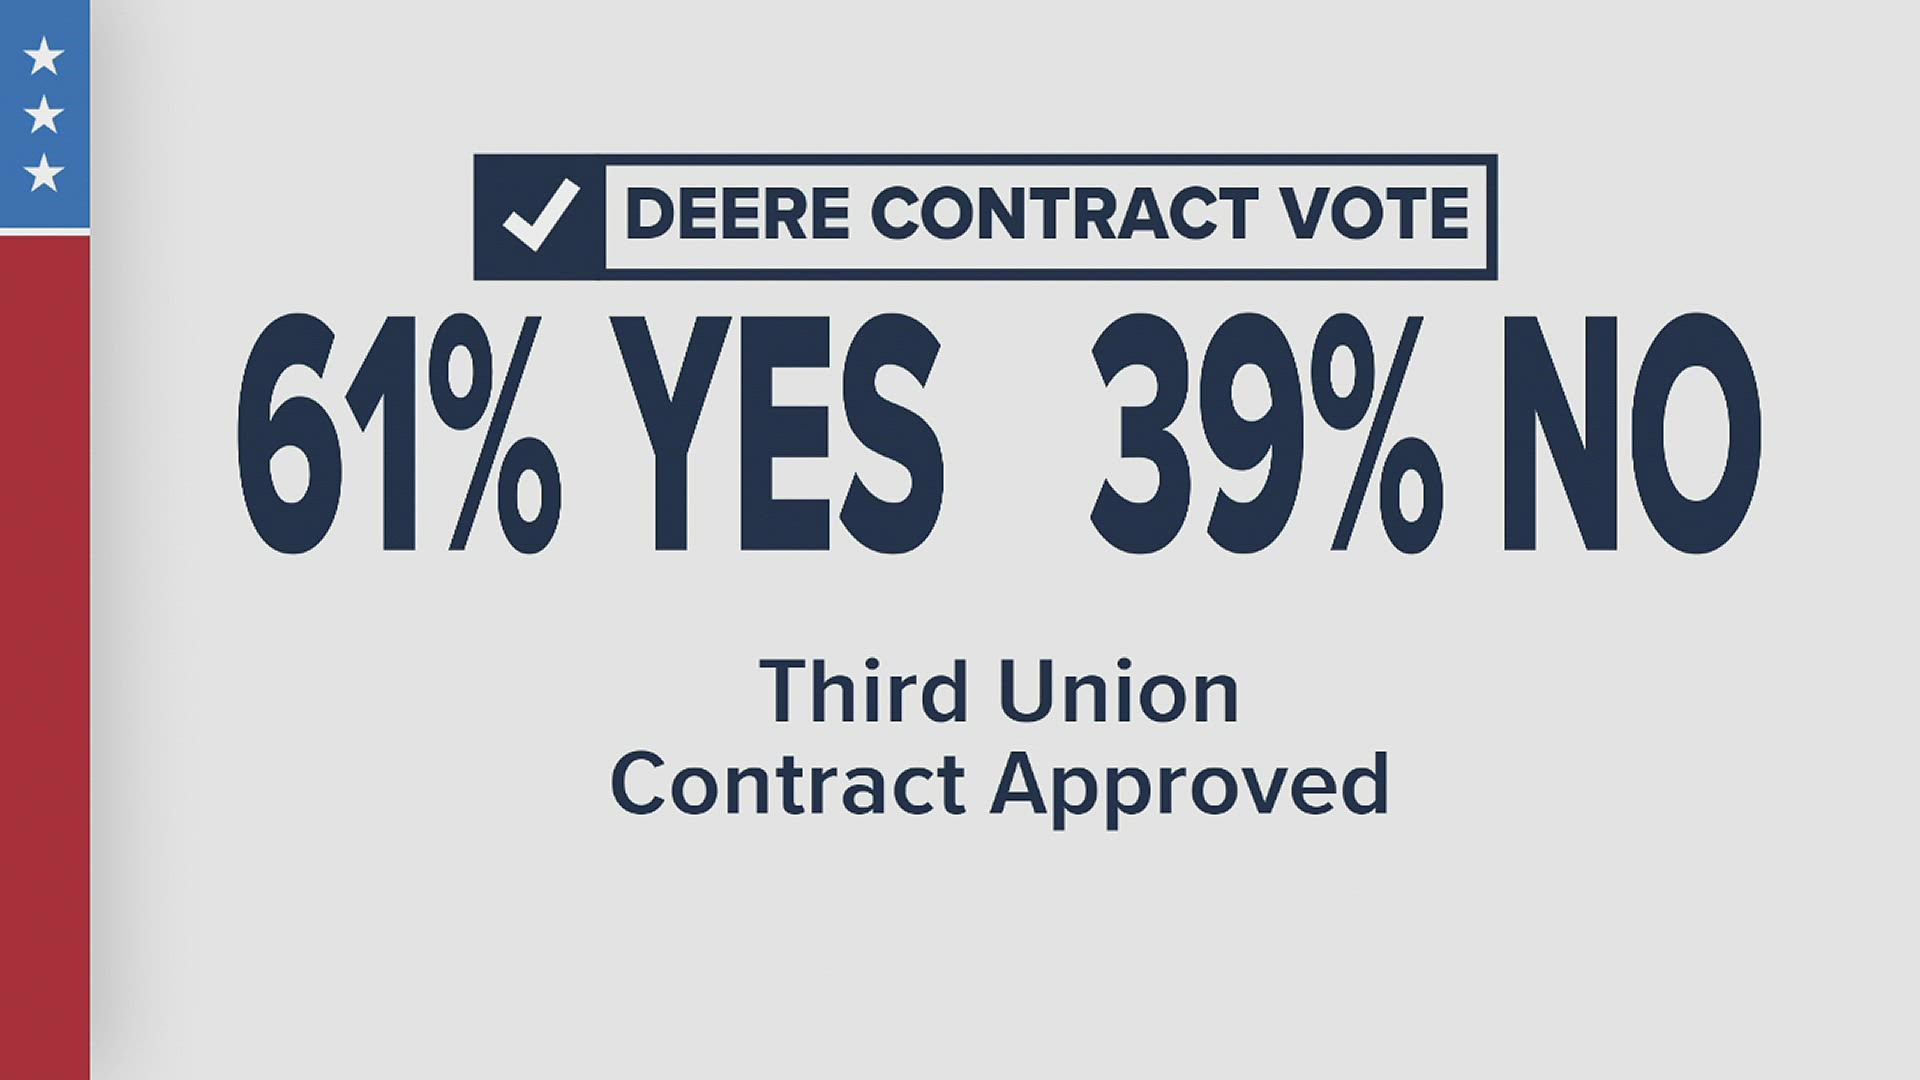 Work at all Deere facilities will continue after 61% of UAW workers voted to accept the third offer.